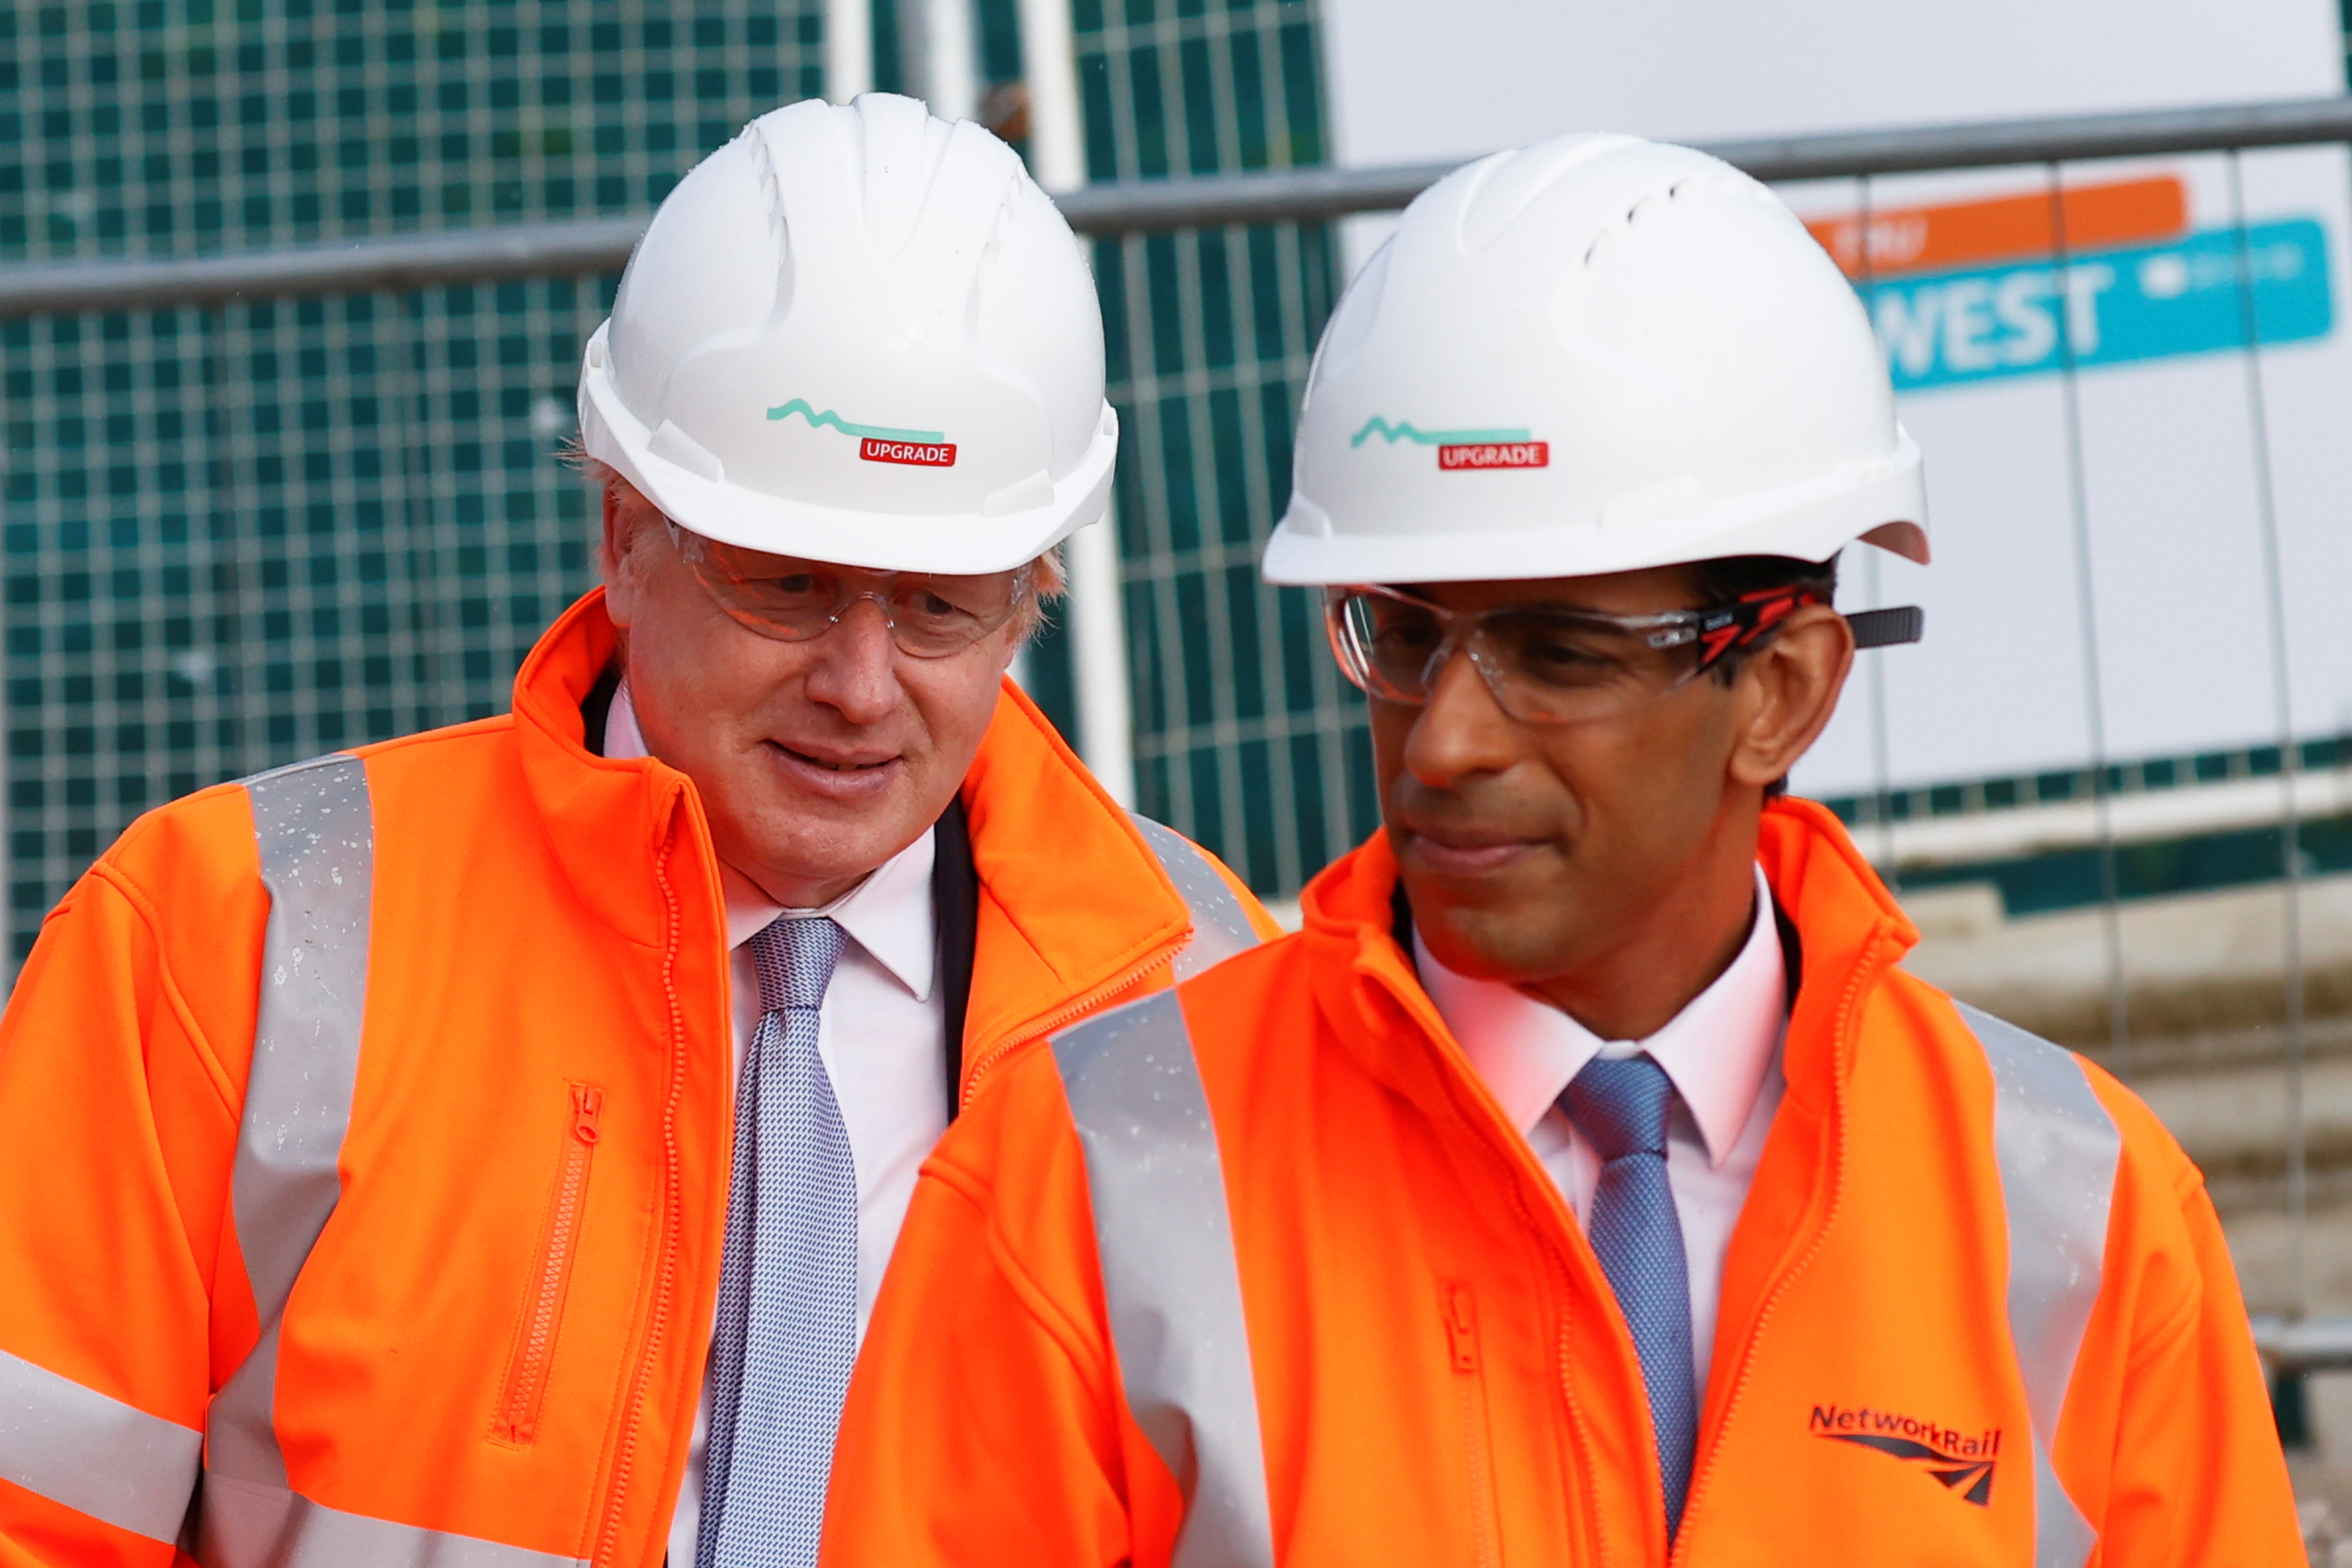 Boris Johnson and Rishi Sunak visit a construction site. Campaigners say government spending plans will result in rising emissions